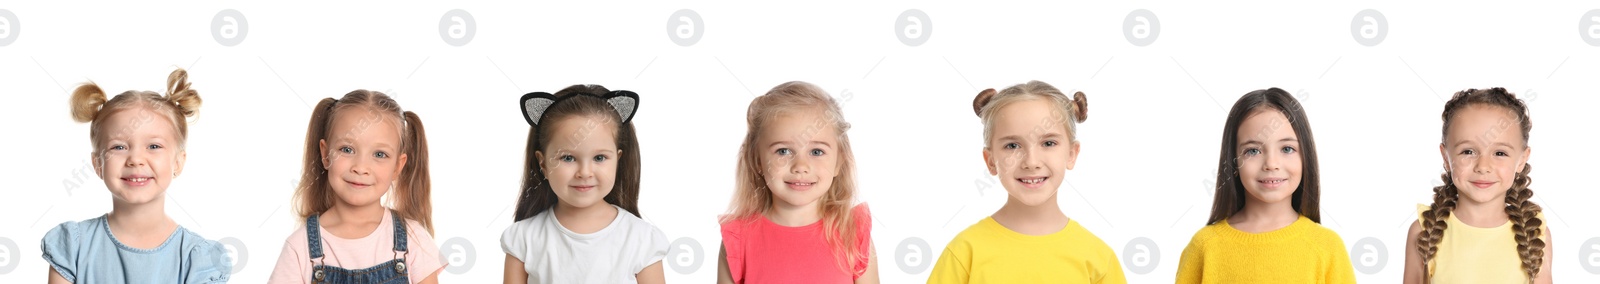 Image of Collage with photos of different cheerful girls on white background